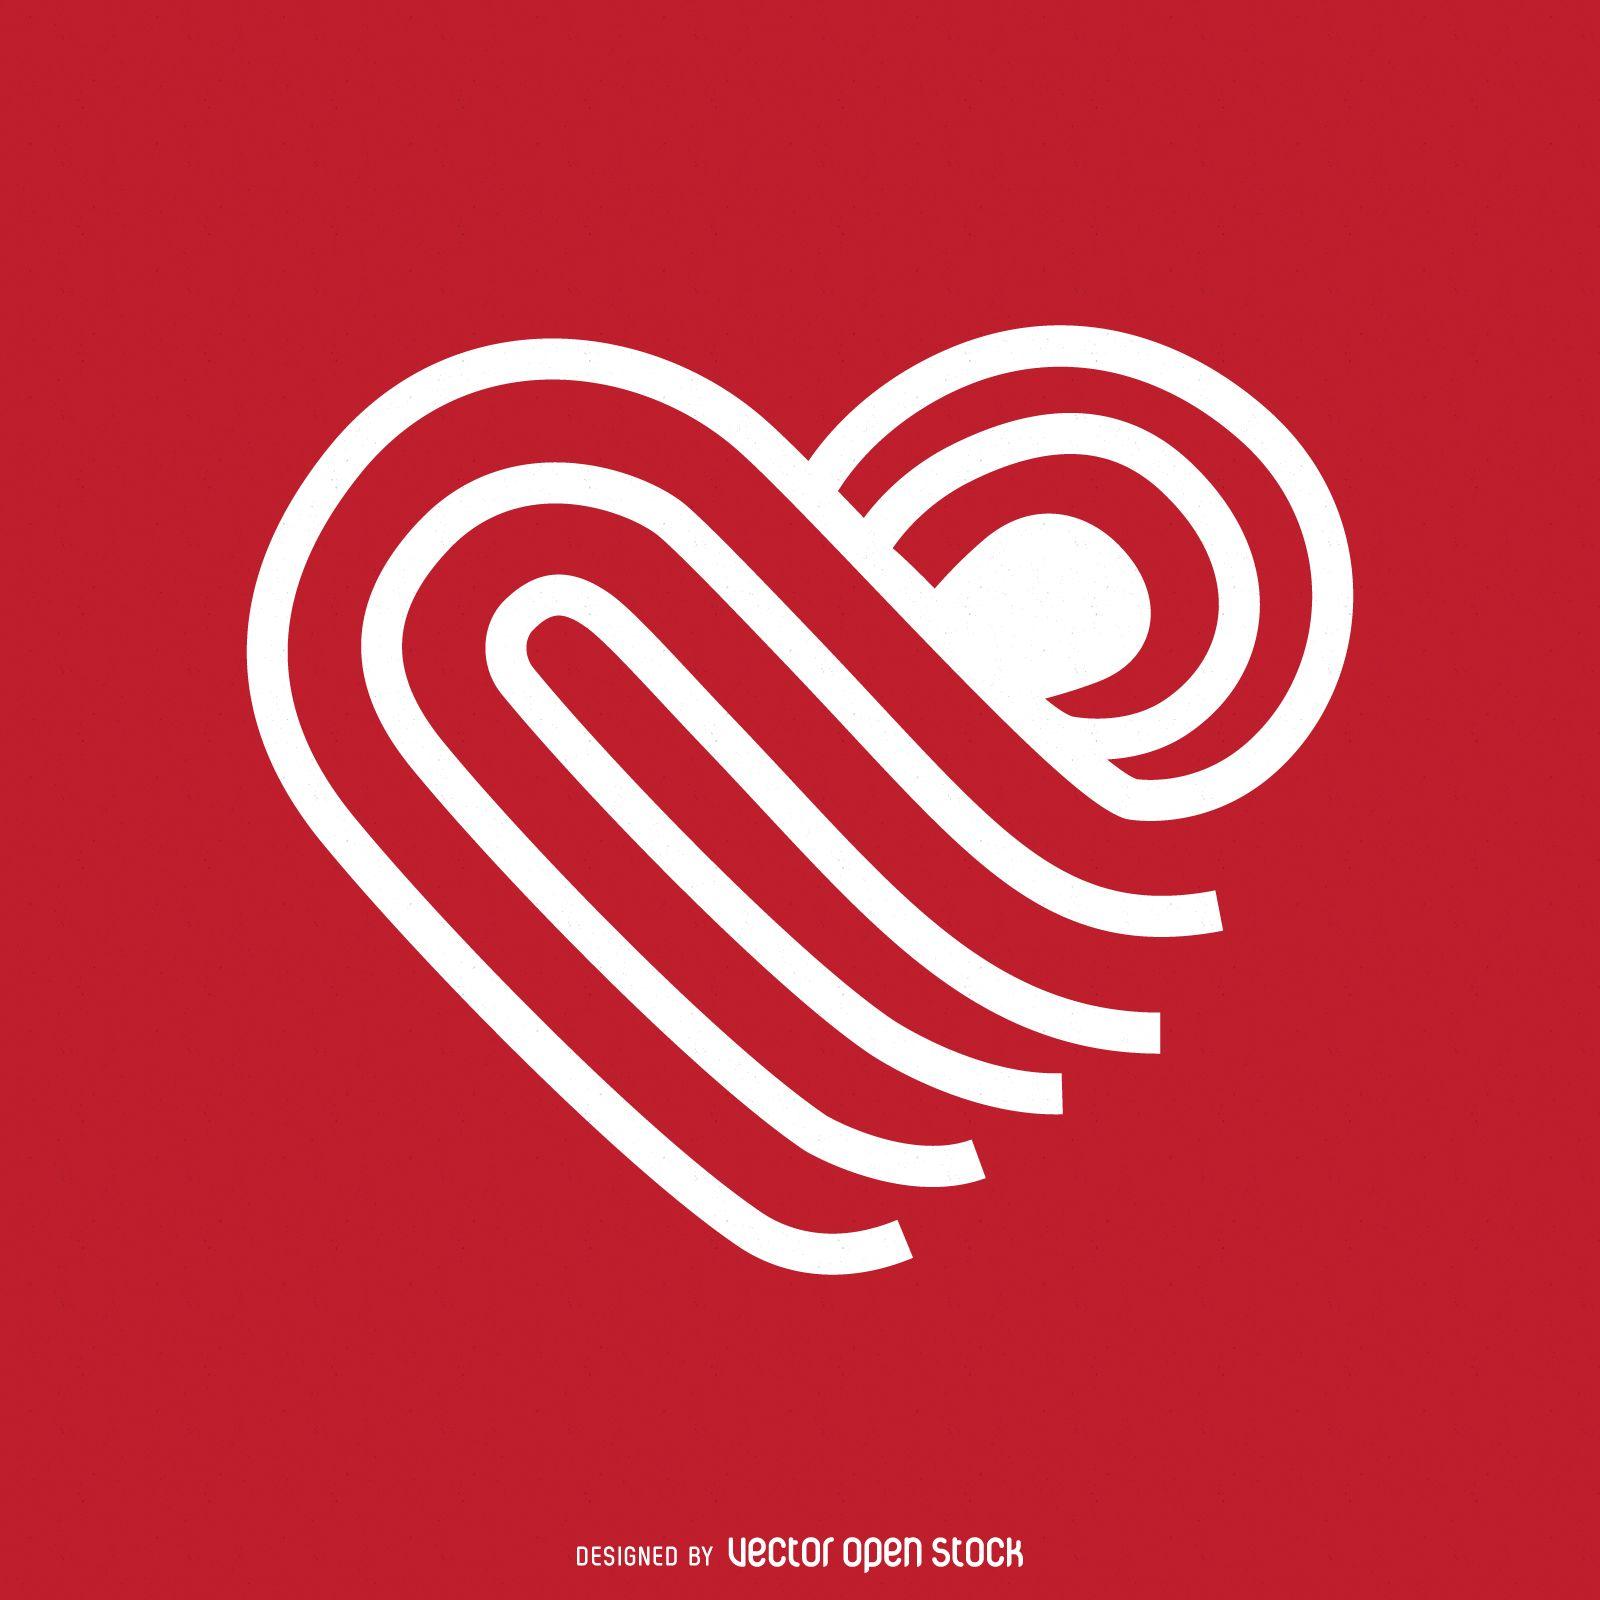 White with Red Shape Logo - Logo template design in the shape of a heart, made from white lines ...